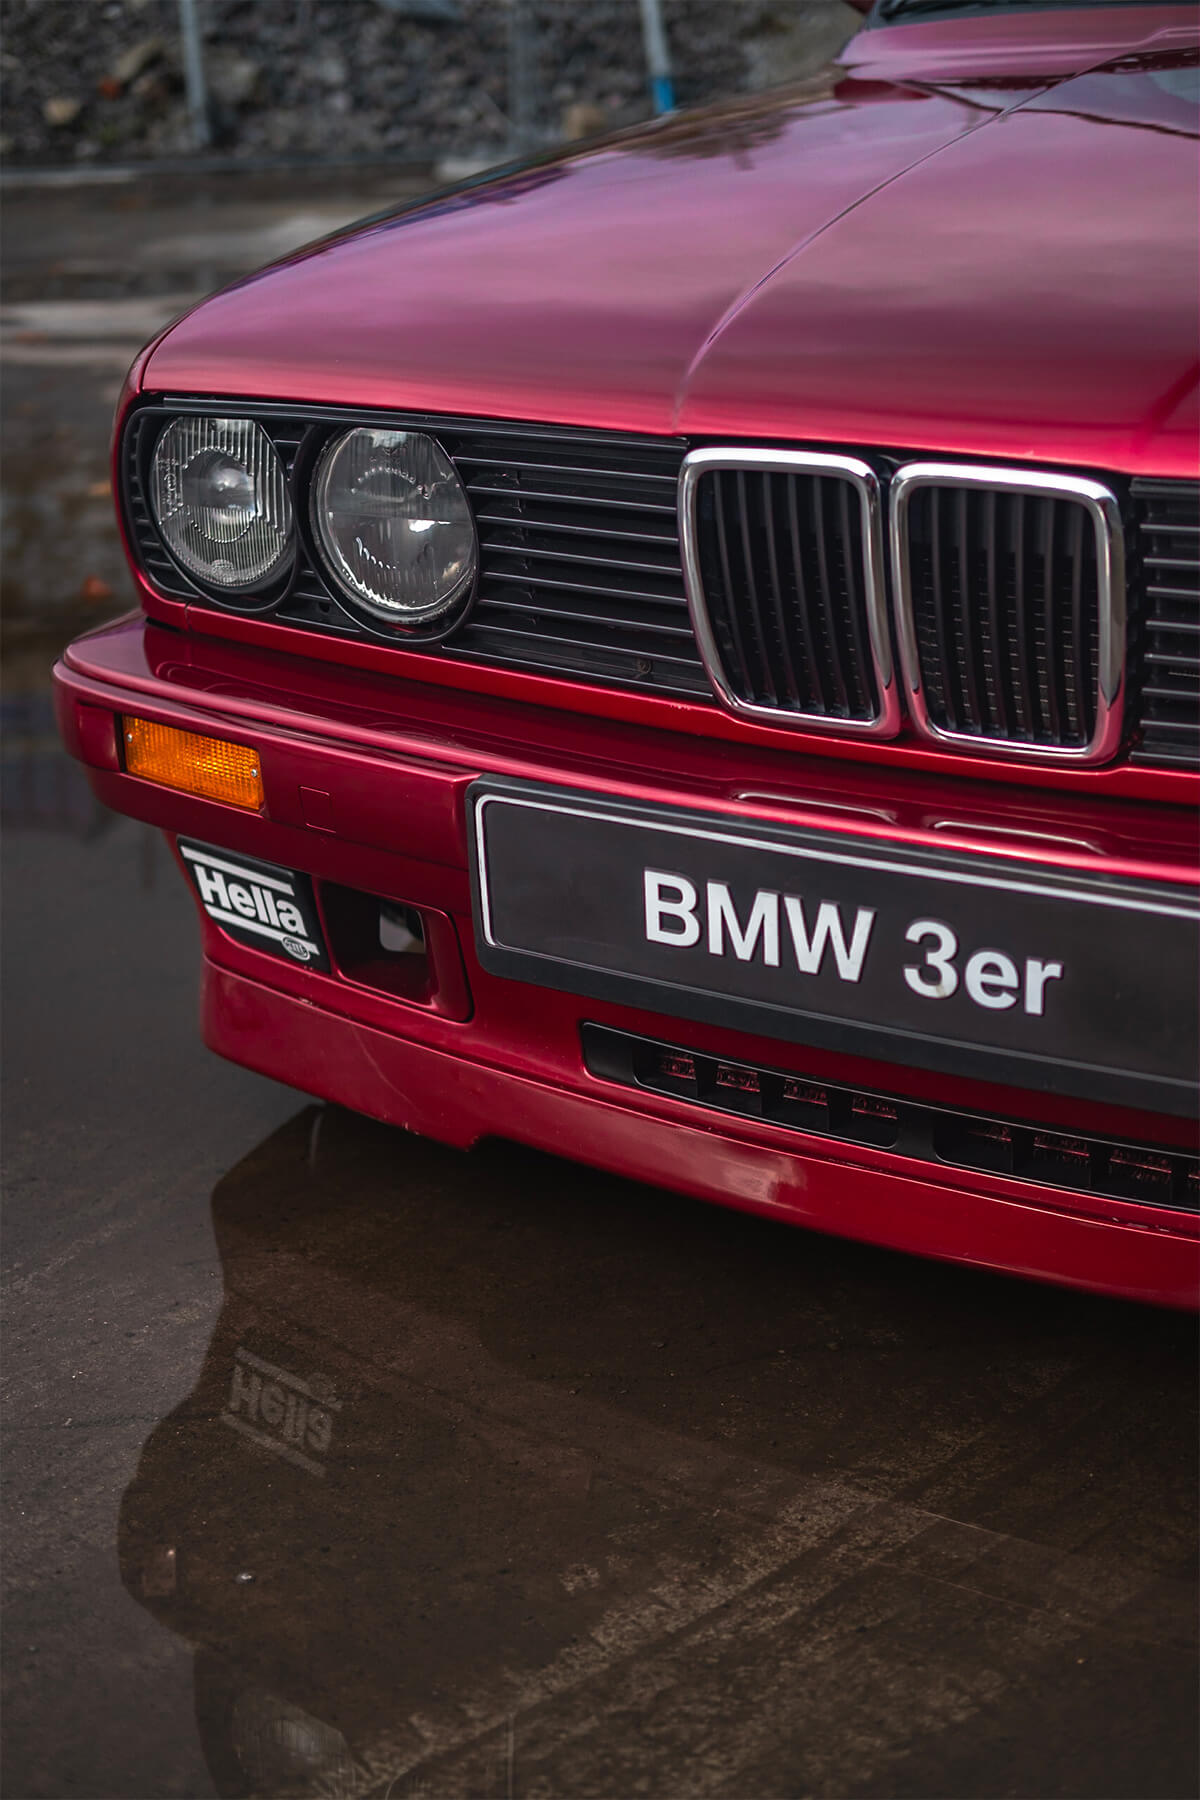 BMW E30 grille and headlights